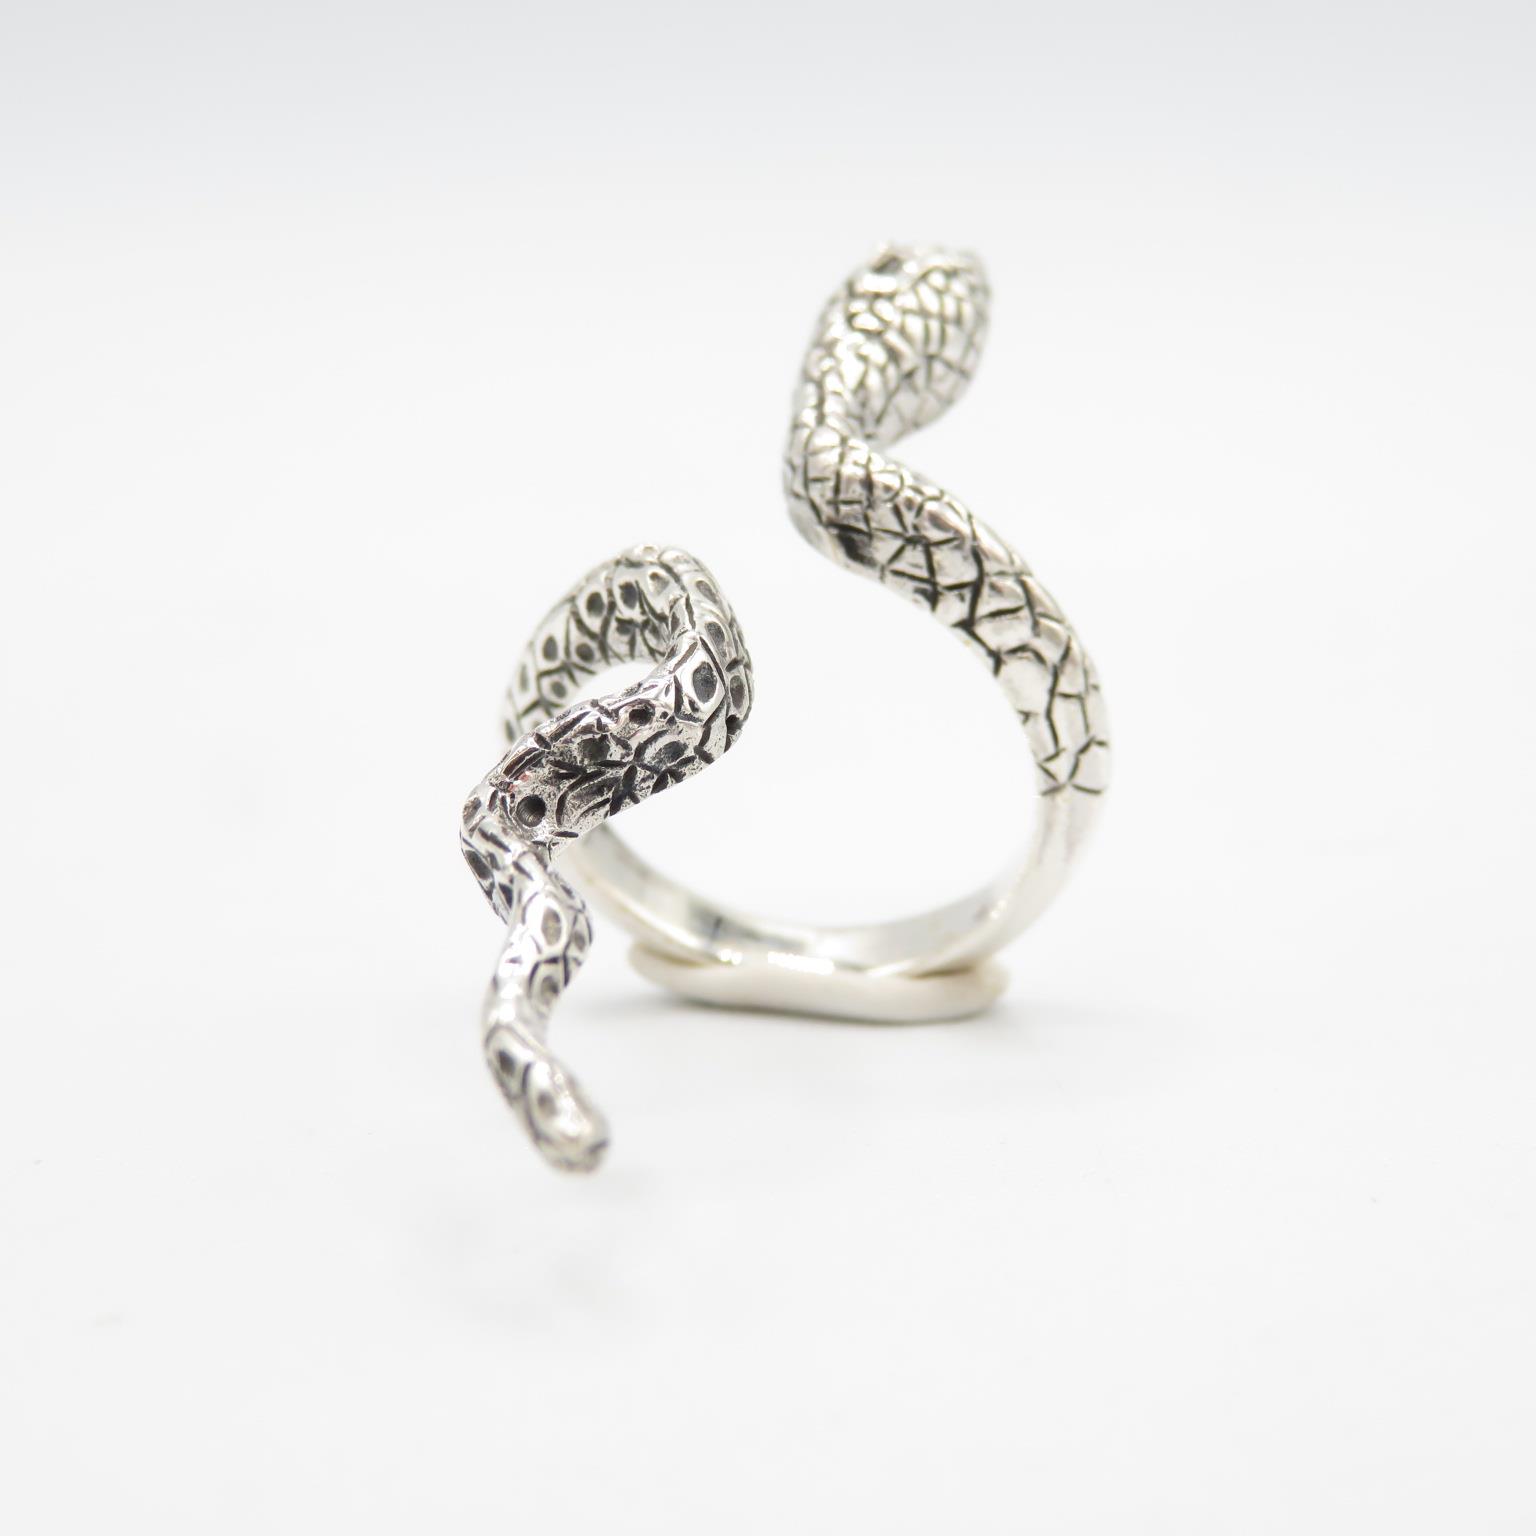 HM Sterling Silver 925 snake ring (7.6g) In excellent condition - Image 5 of 5